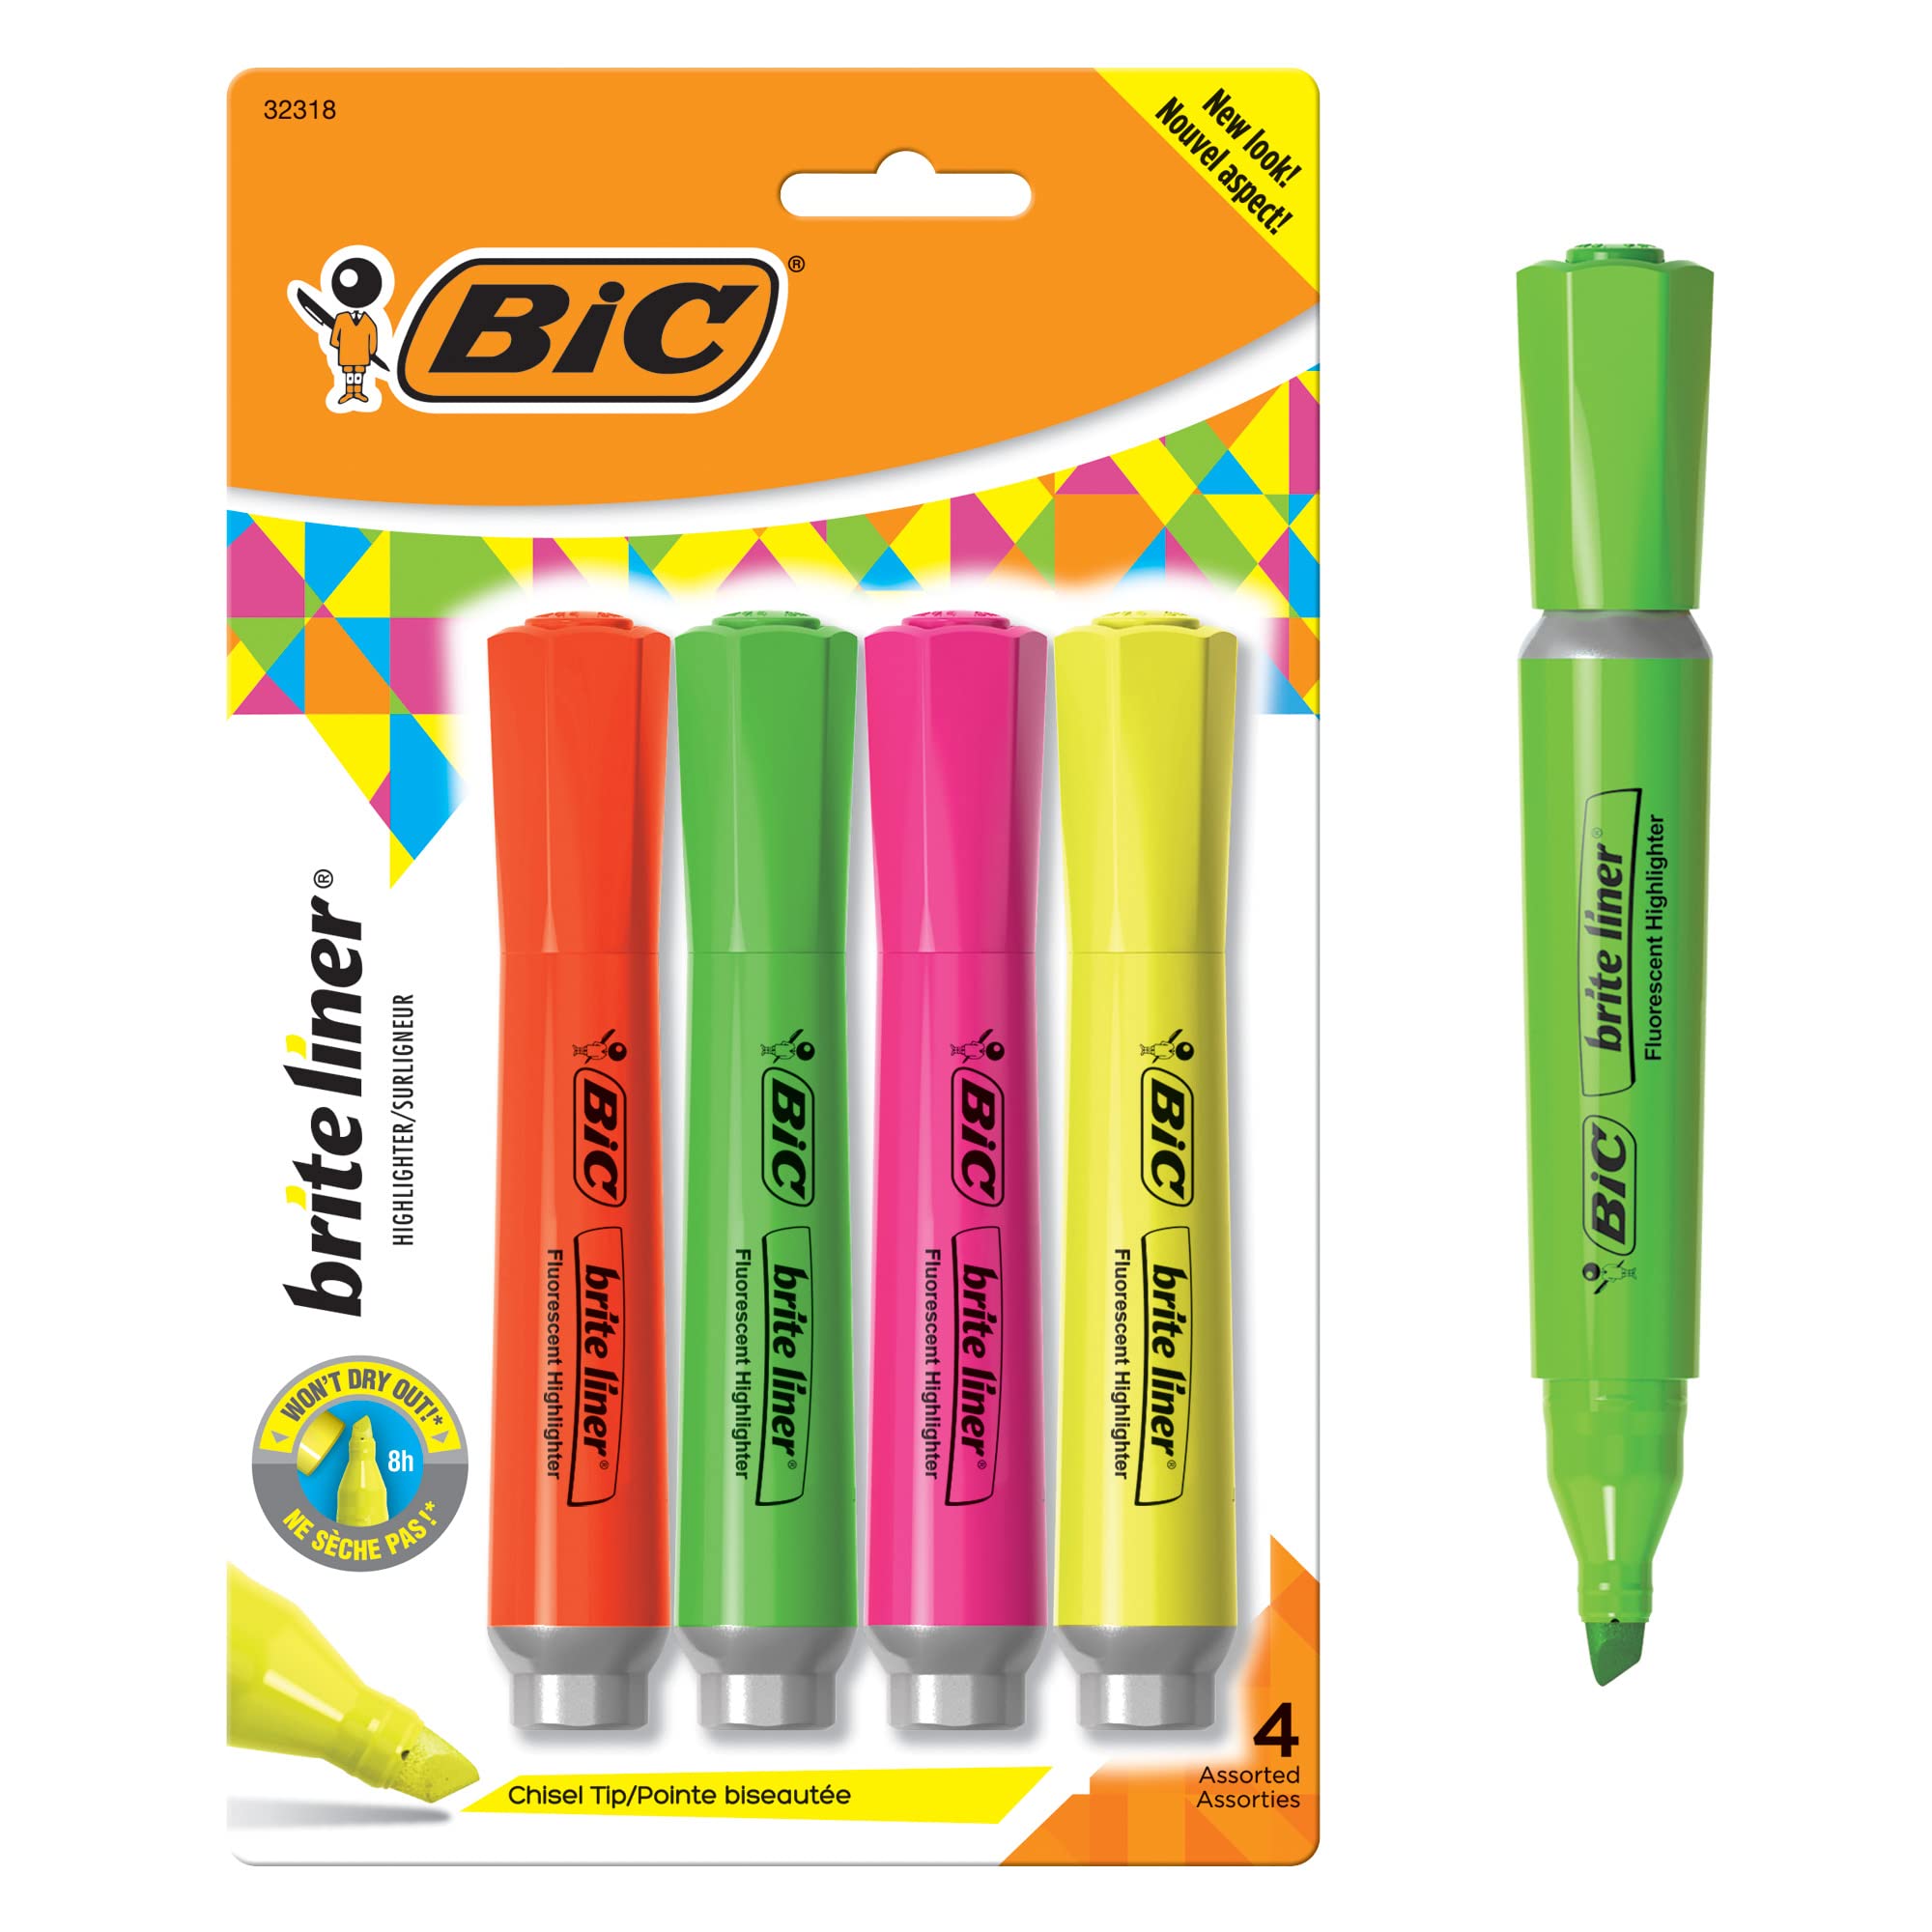 4-Pack BIC Brite Liner Assorted Highlighter w/ Rubber Grip (Chisel Tip) $1.69 w/ S&S + Free Shipping w/ Prime or on orders over $35